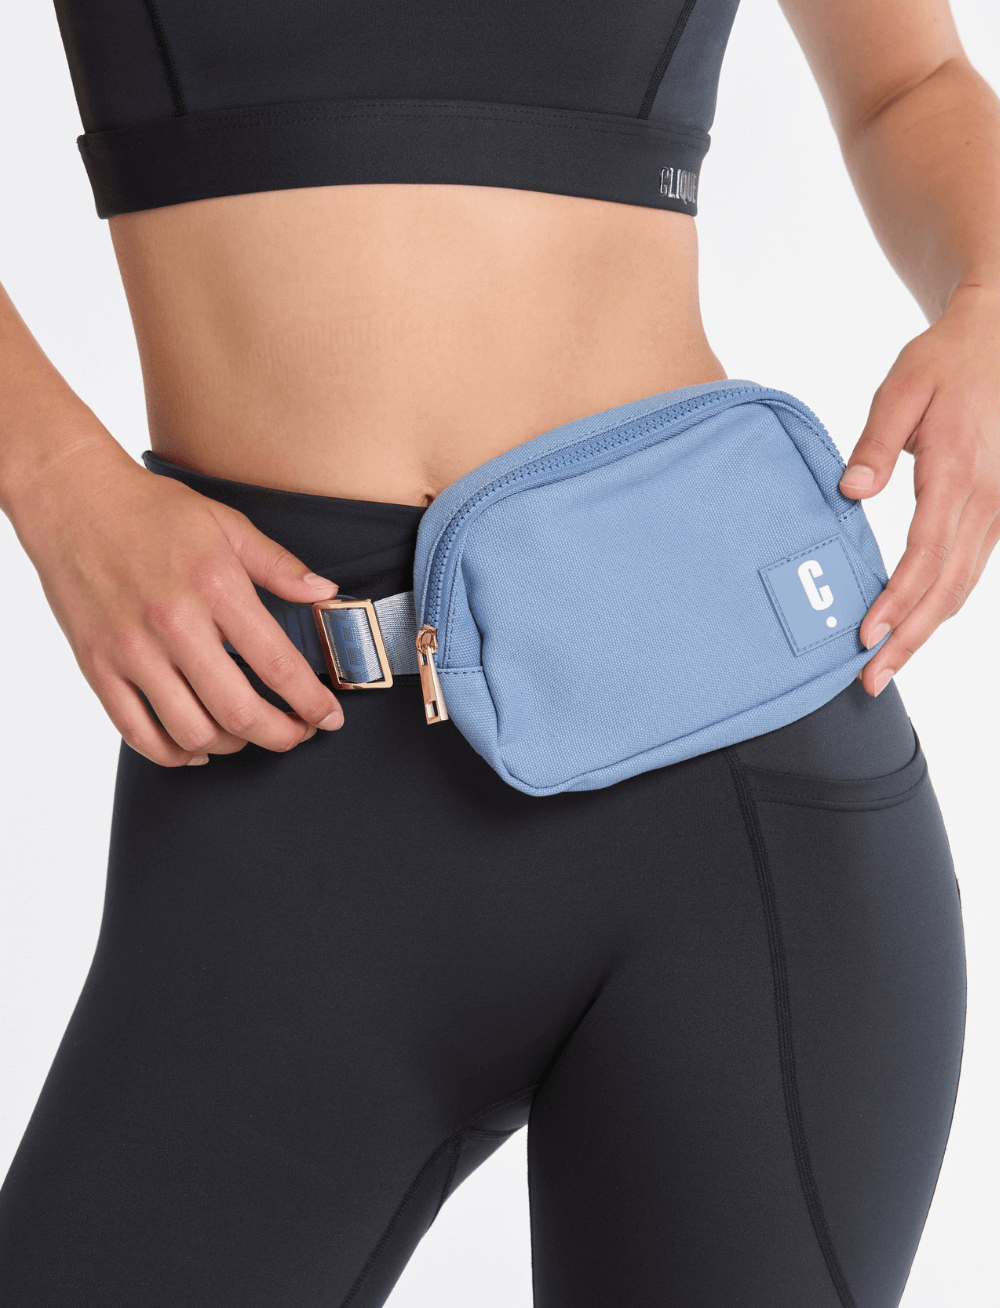 Fanny Pack - Periwinkle